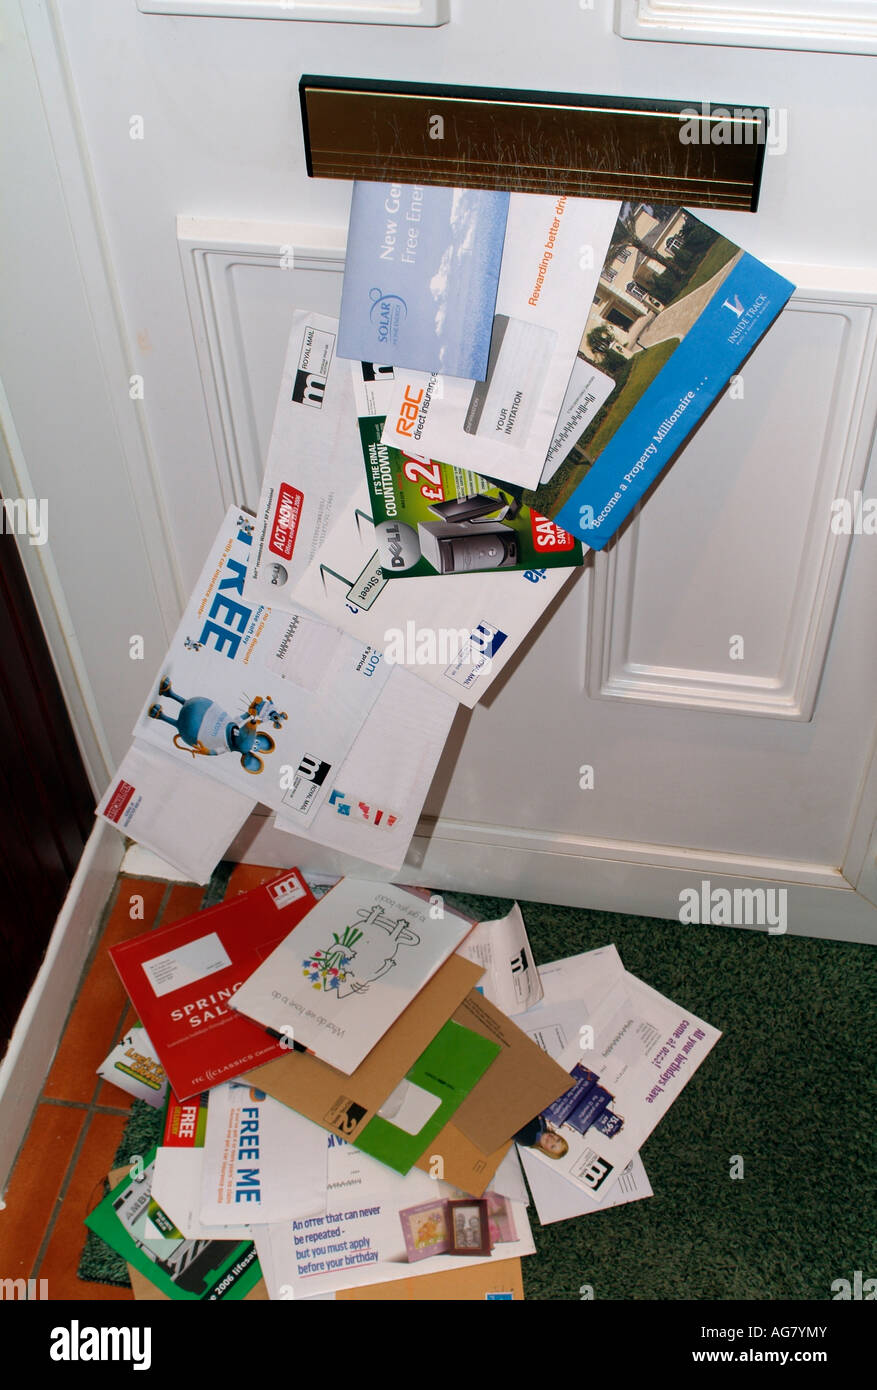 Junk Mail Unwanted Mail Posted Through a Front Door Letterbox Stock Photo